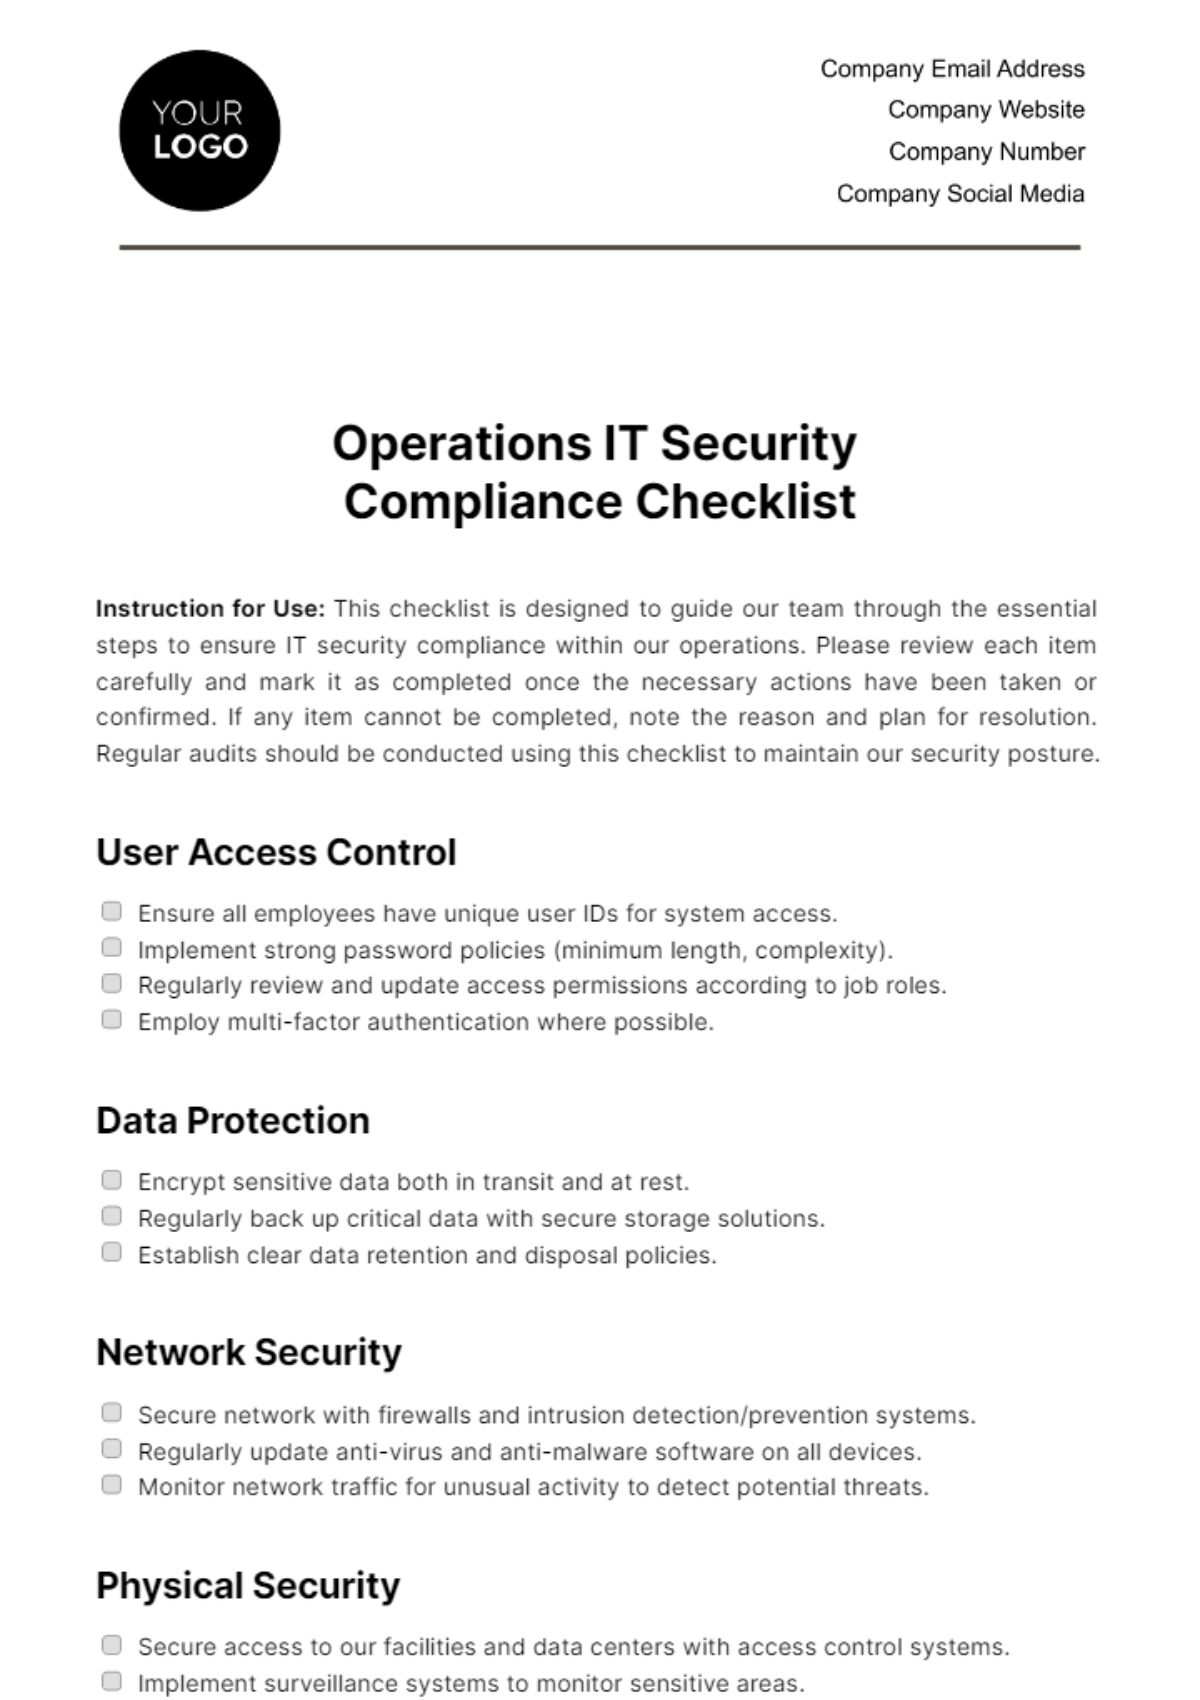   Operations IT Security Compliance Checklist Template